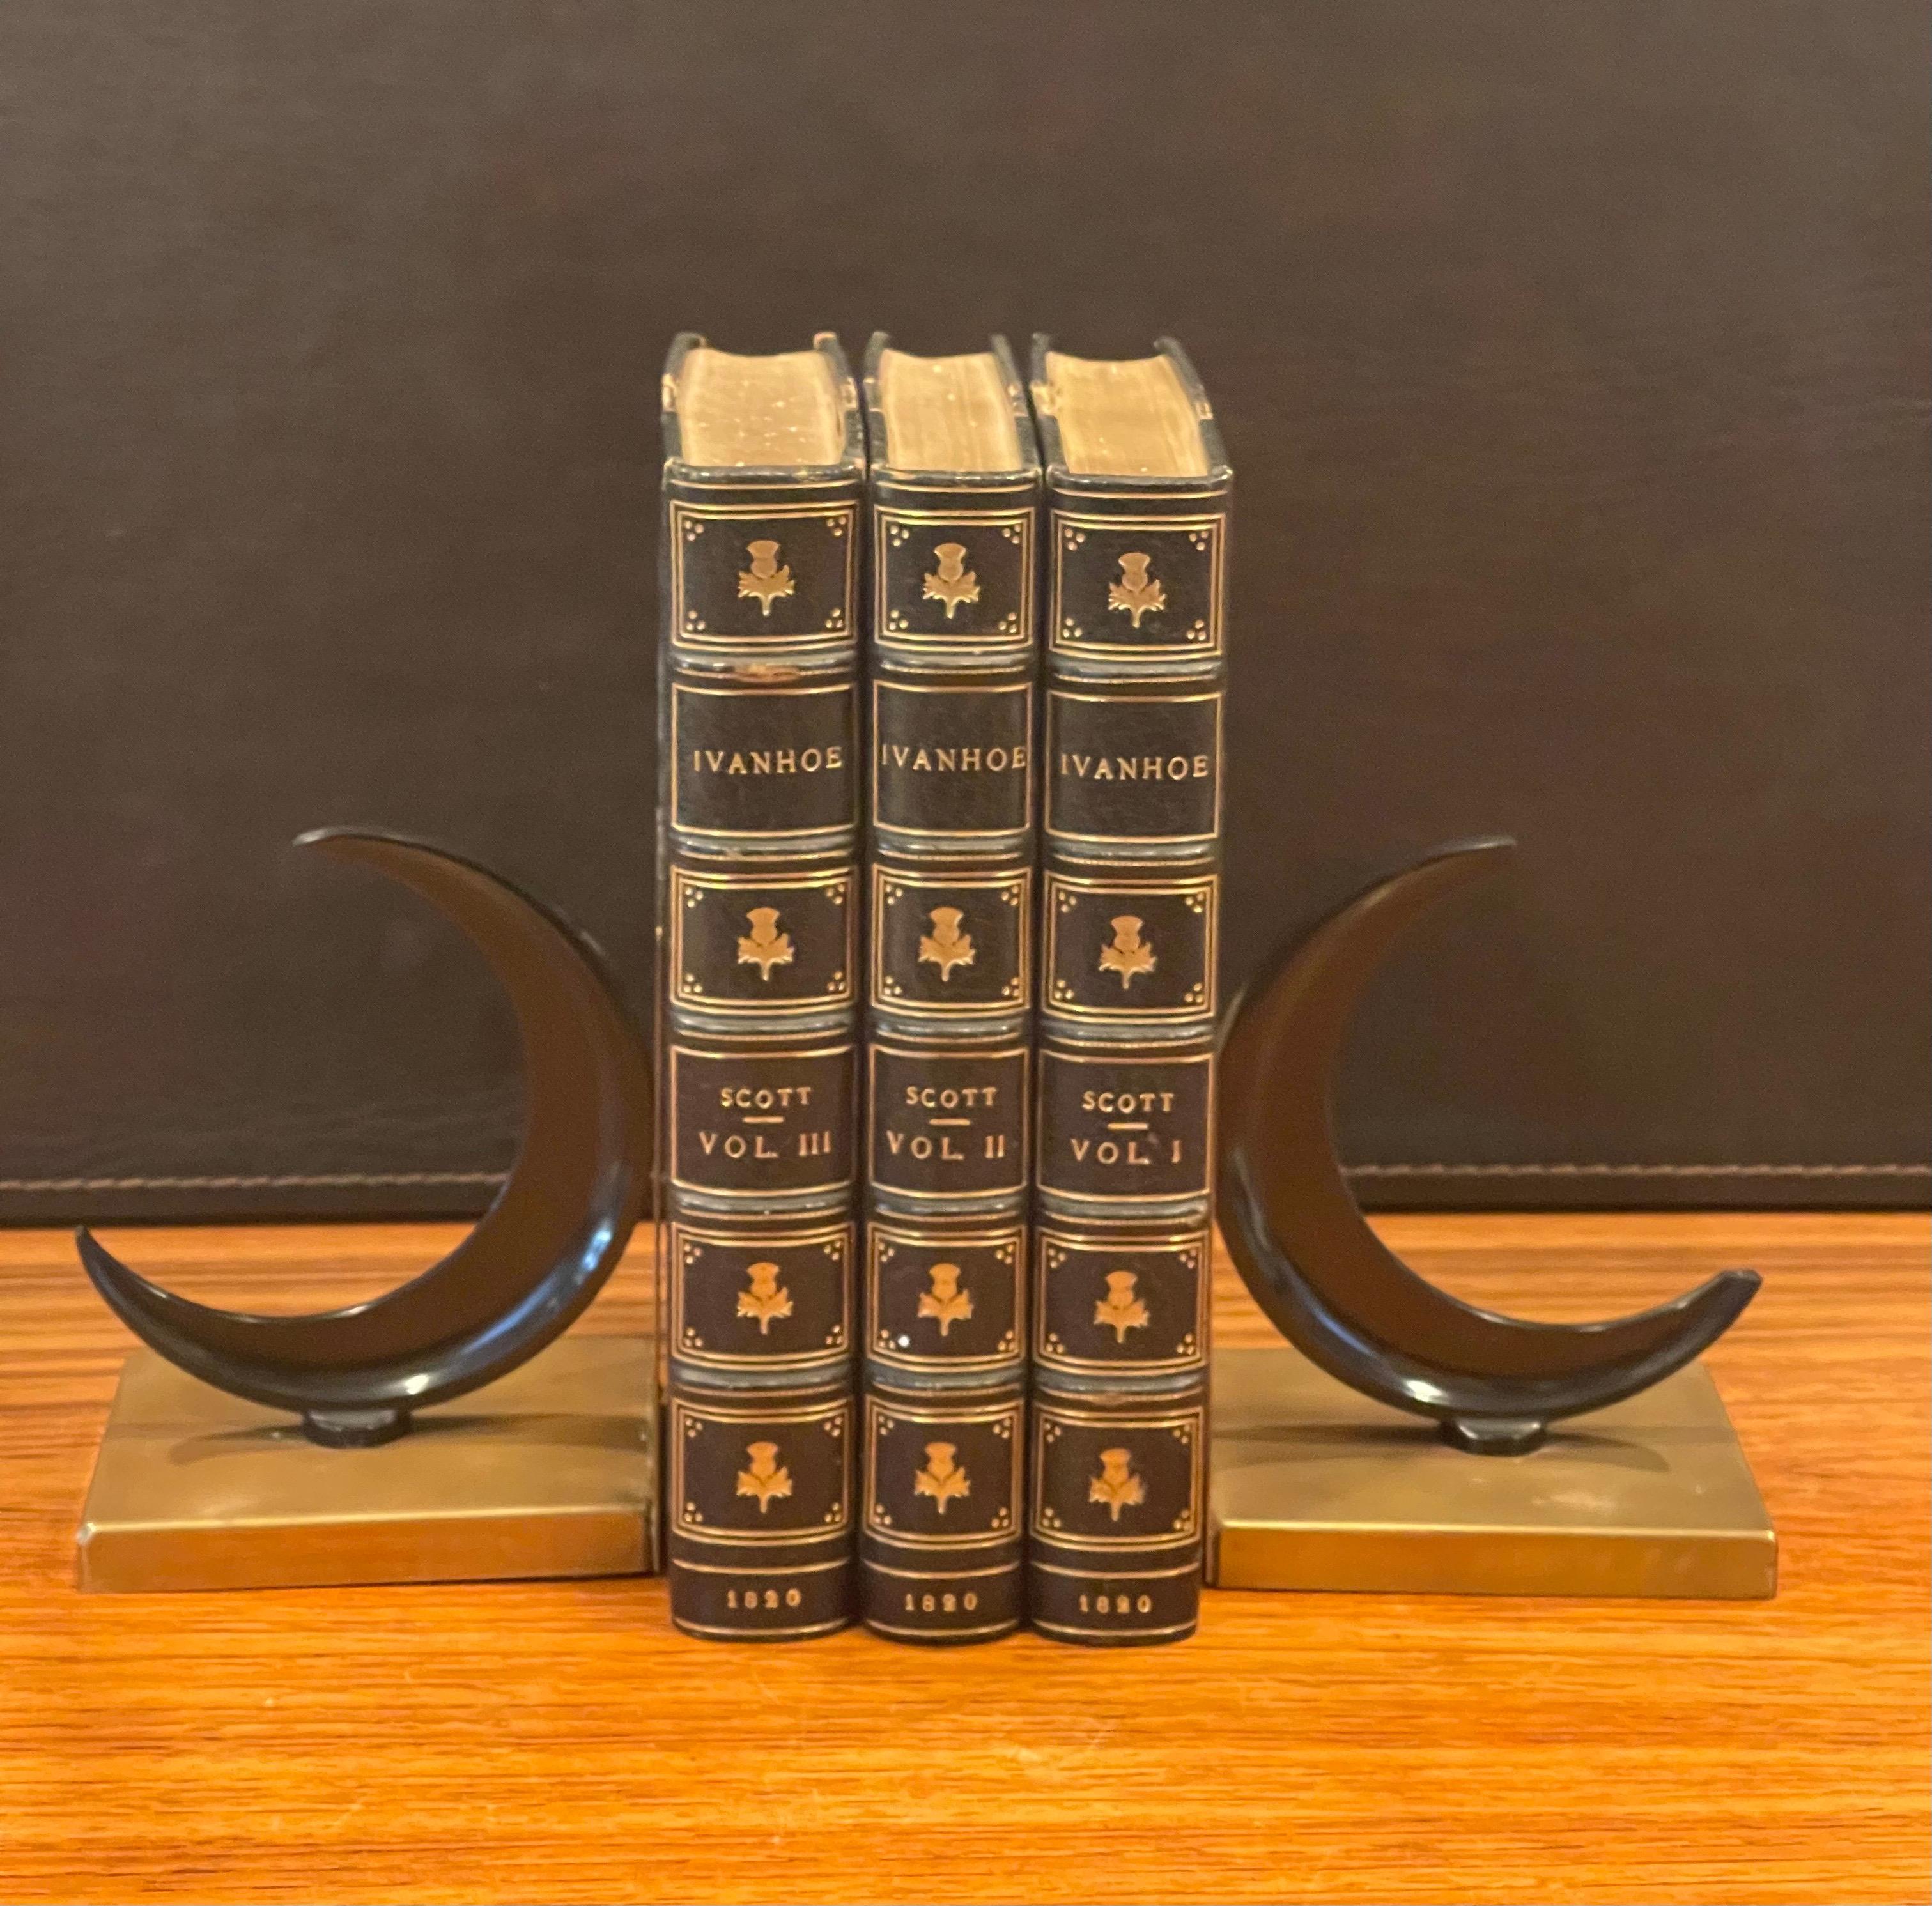 Gorgeous pair of bakelite crescent moon and brass Art Deco bookends by Walter Von Nessen for Chase & Co., circa 1930s. The bookends have a black bakelite crescent moon siitting on a brass 